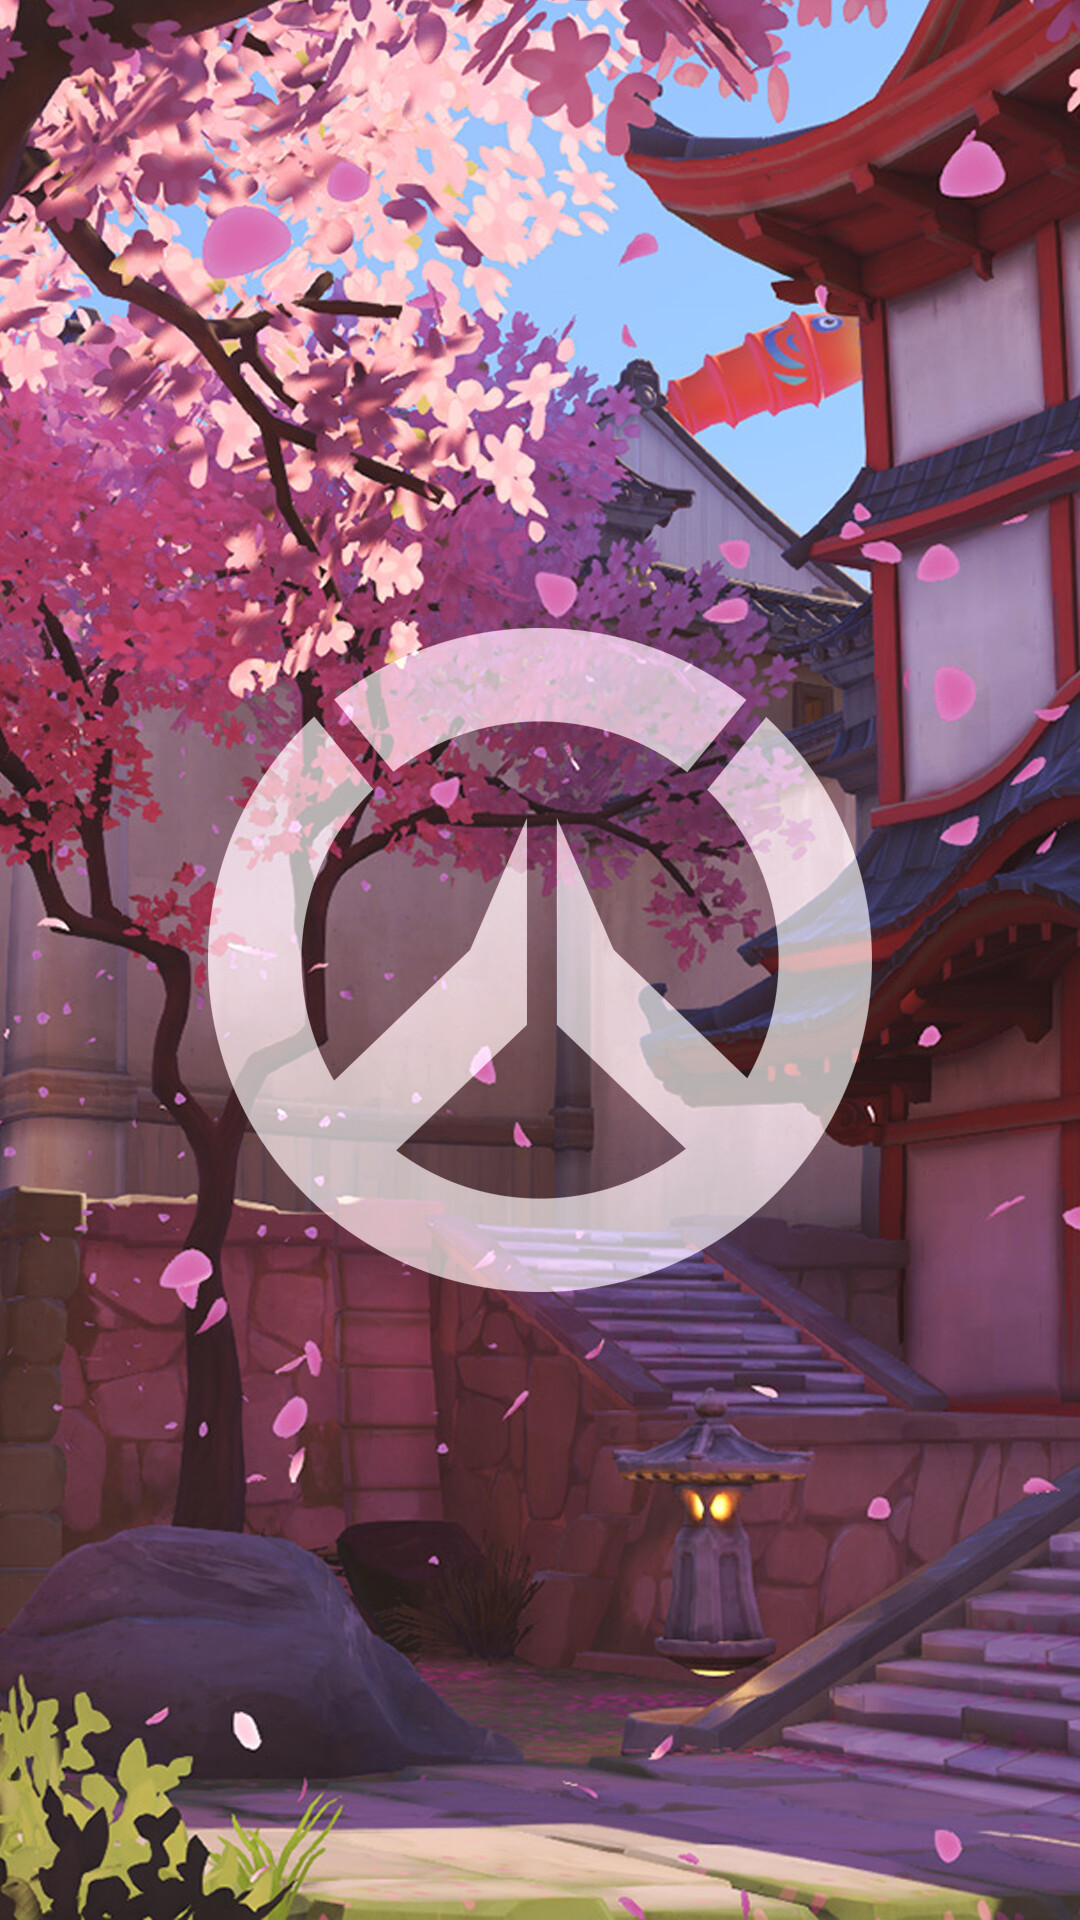 Overwatch: A team-based first-person shooter developed by Blizzard Entertainment. 1080x1920 Full HD Background.